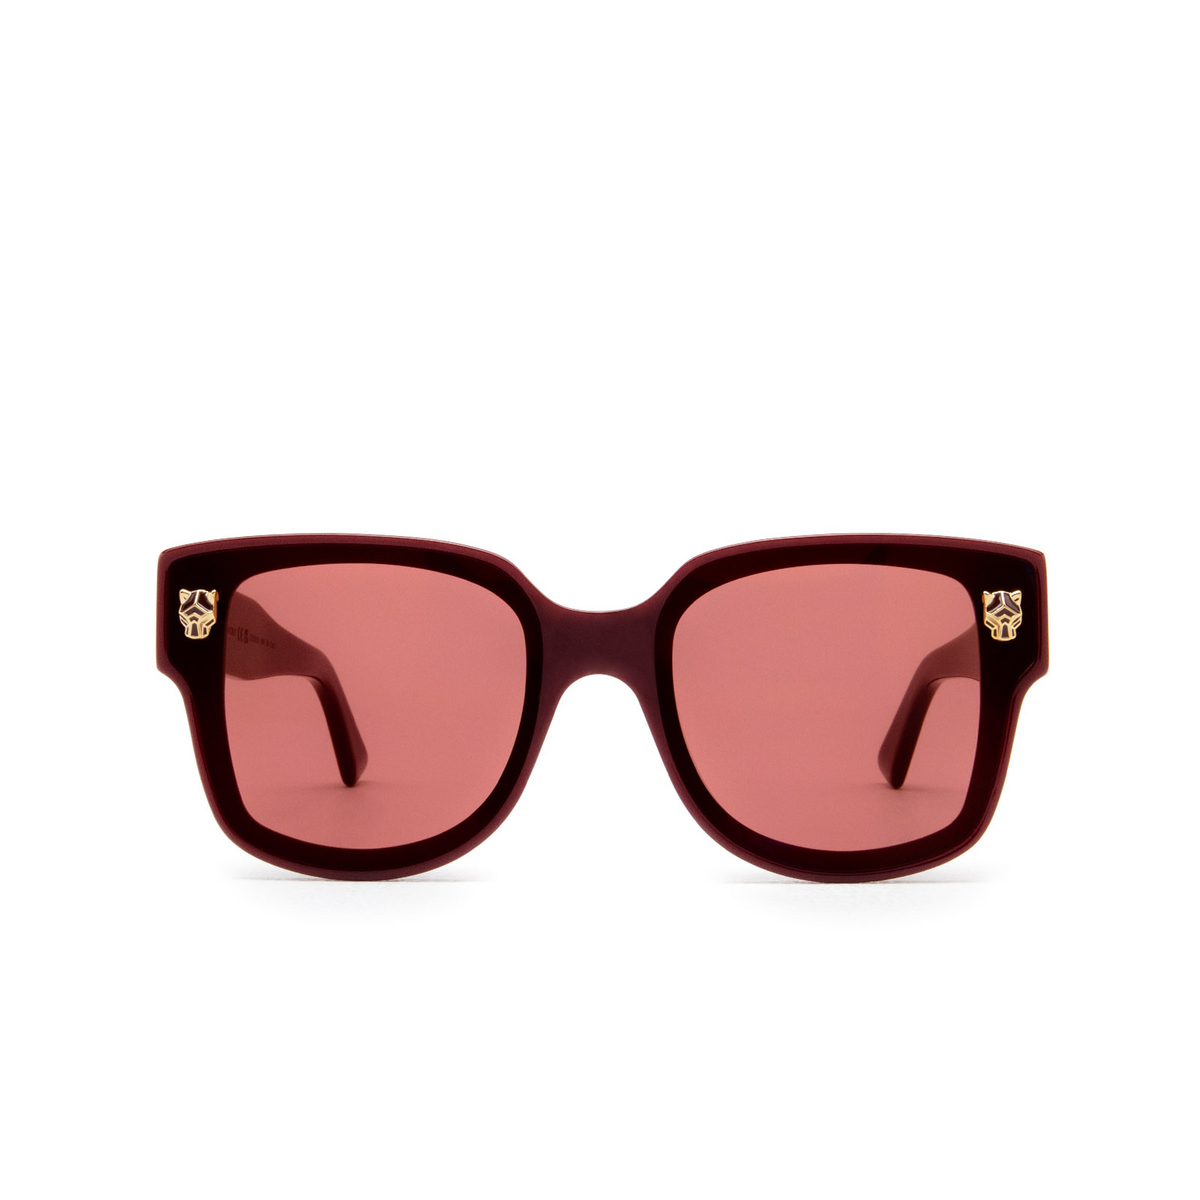 Cartier CT0357S Sunglasses 004 Burgundy - front view